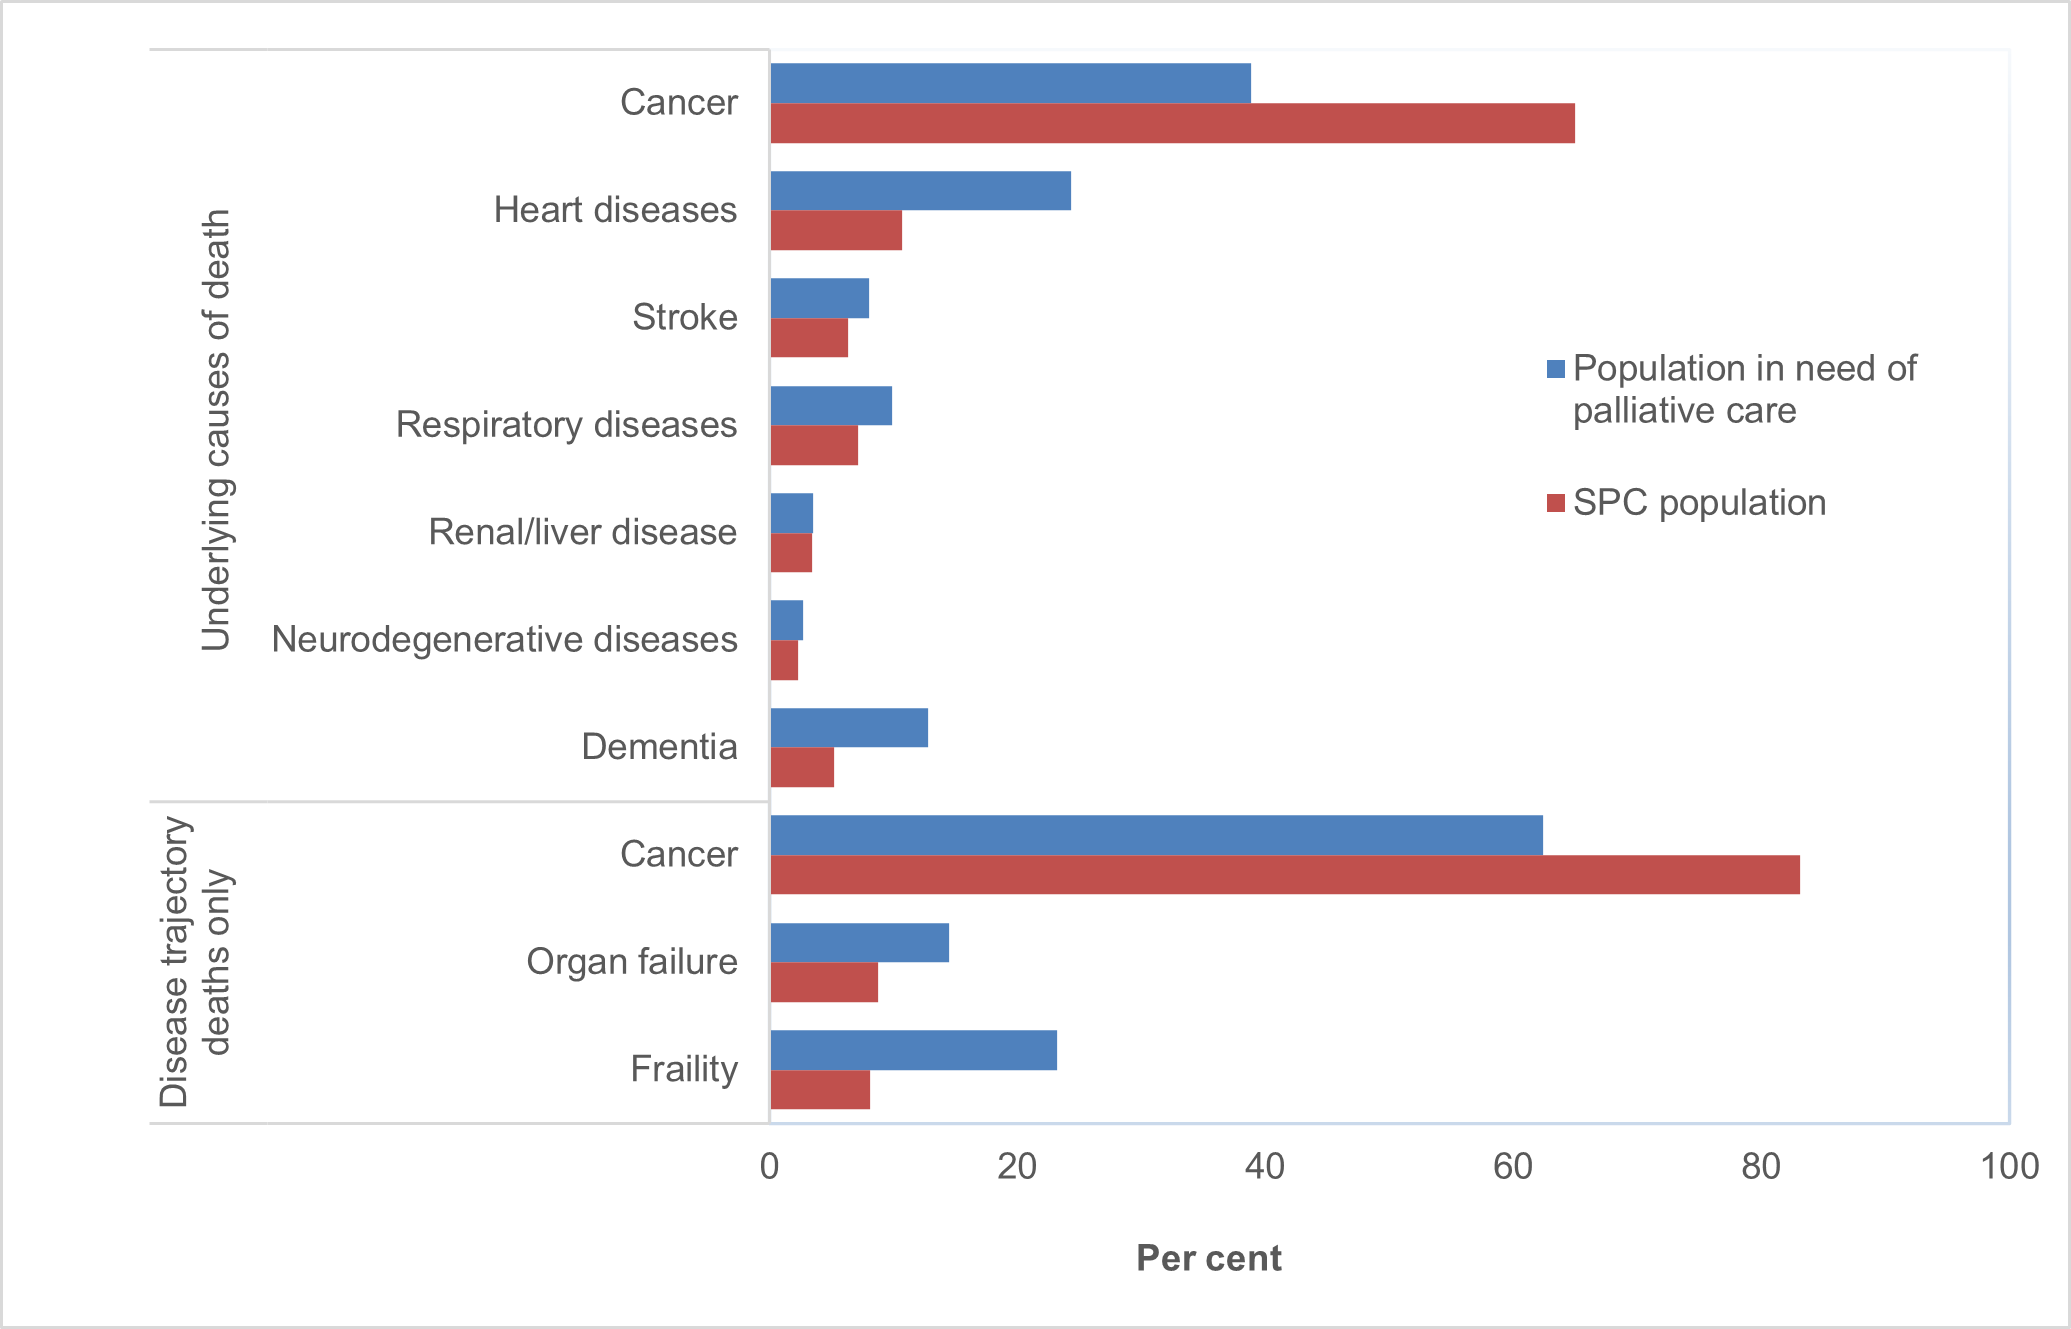 This figure shows relative frequencies (%) of the 3 end-of-life disease trajectories (cancer, organ failure, frailty), for the whole population in need of palliative care, compared with its SPC sub-population. It also includes underlying causes of death.